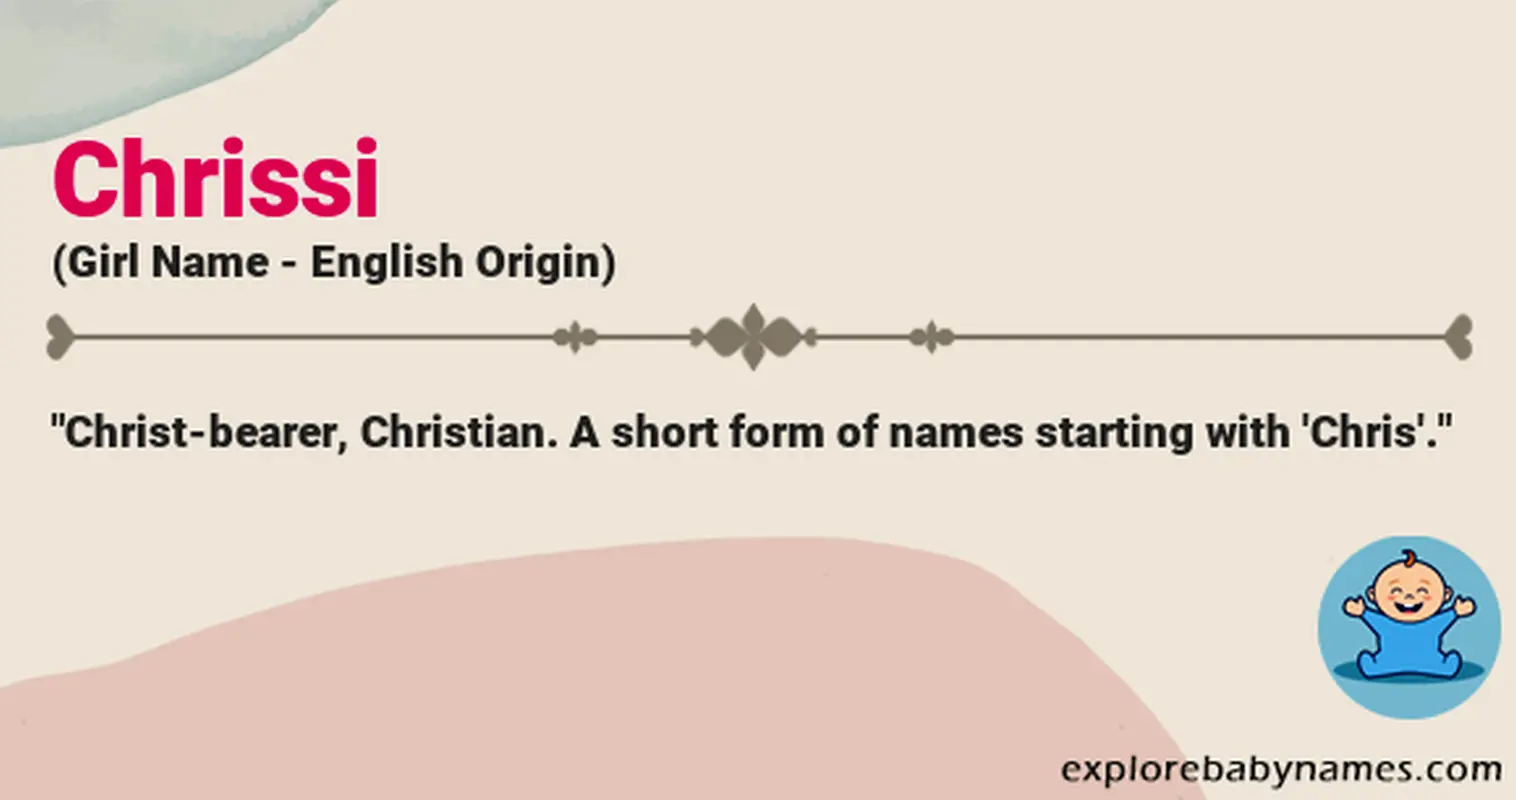 Meaning of Chrissi